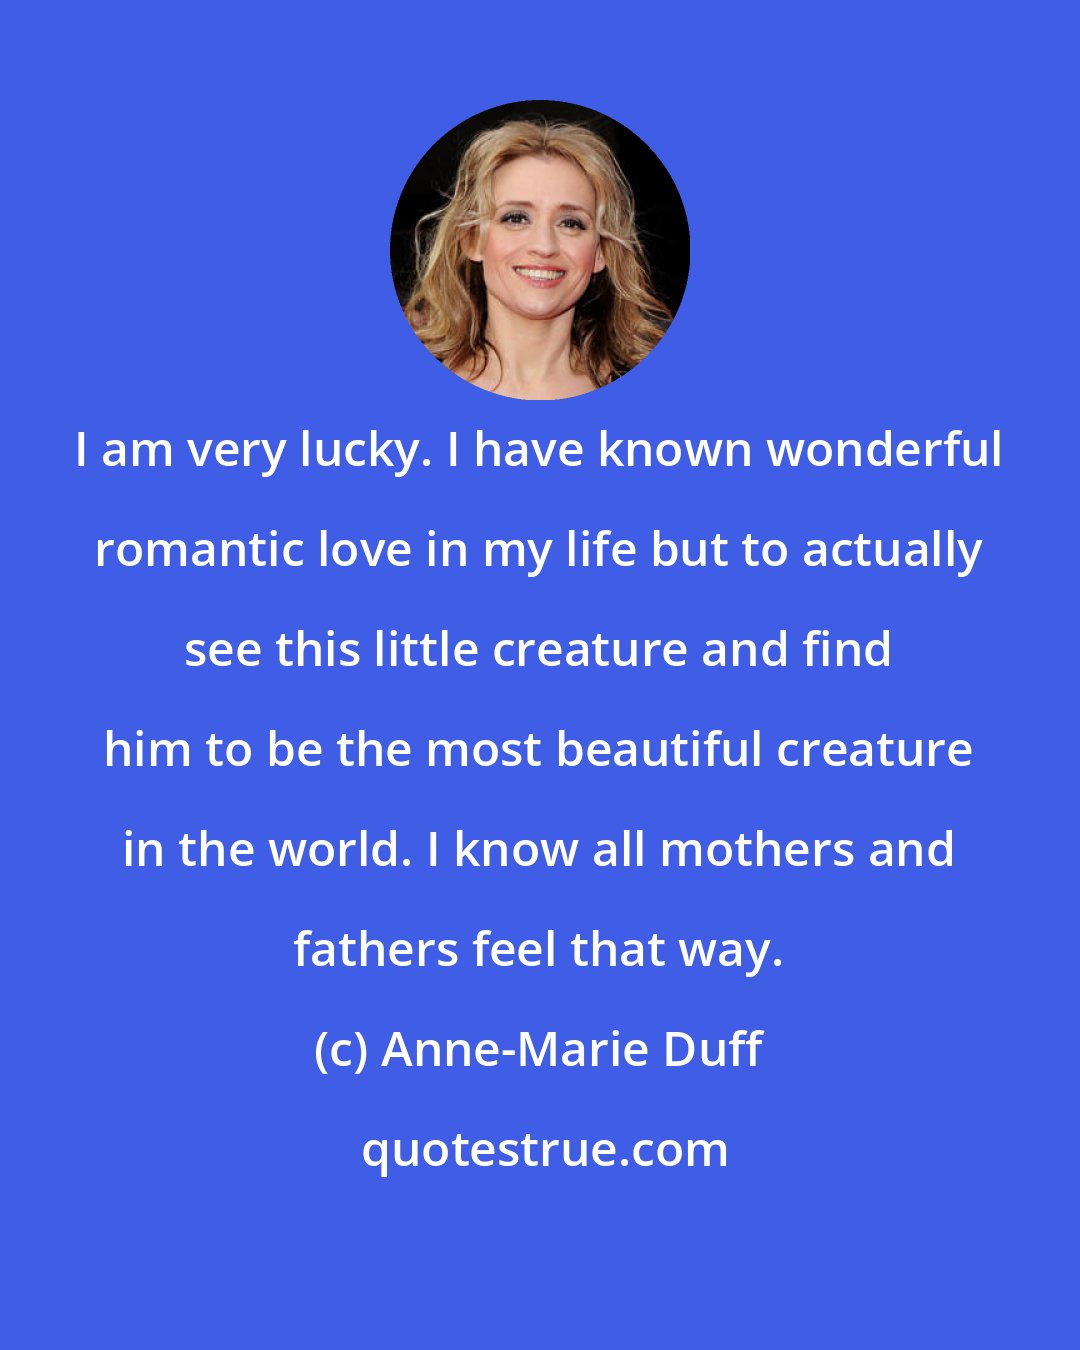 Anne-Marie Duff: I am very lucky. I have known wonderful romantic love in my life but to actually see this little creature and find him to be the most beautiful creature in the world. I know all mothers and fathers feel that way.